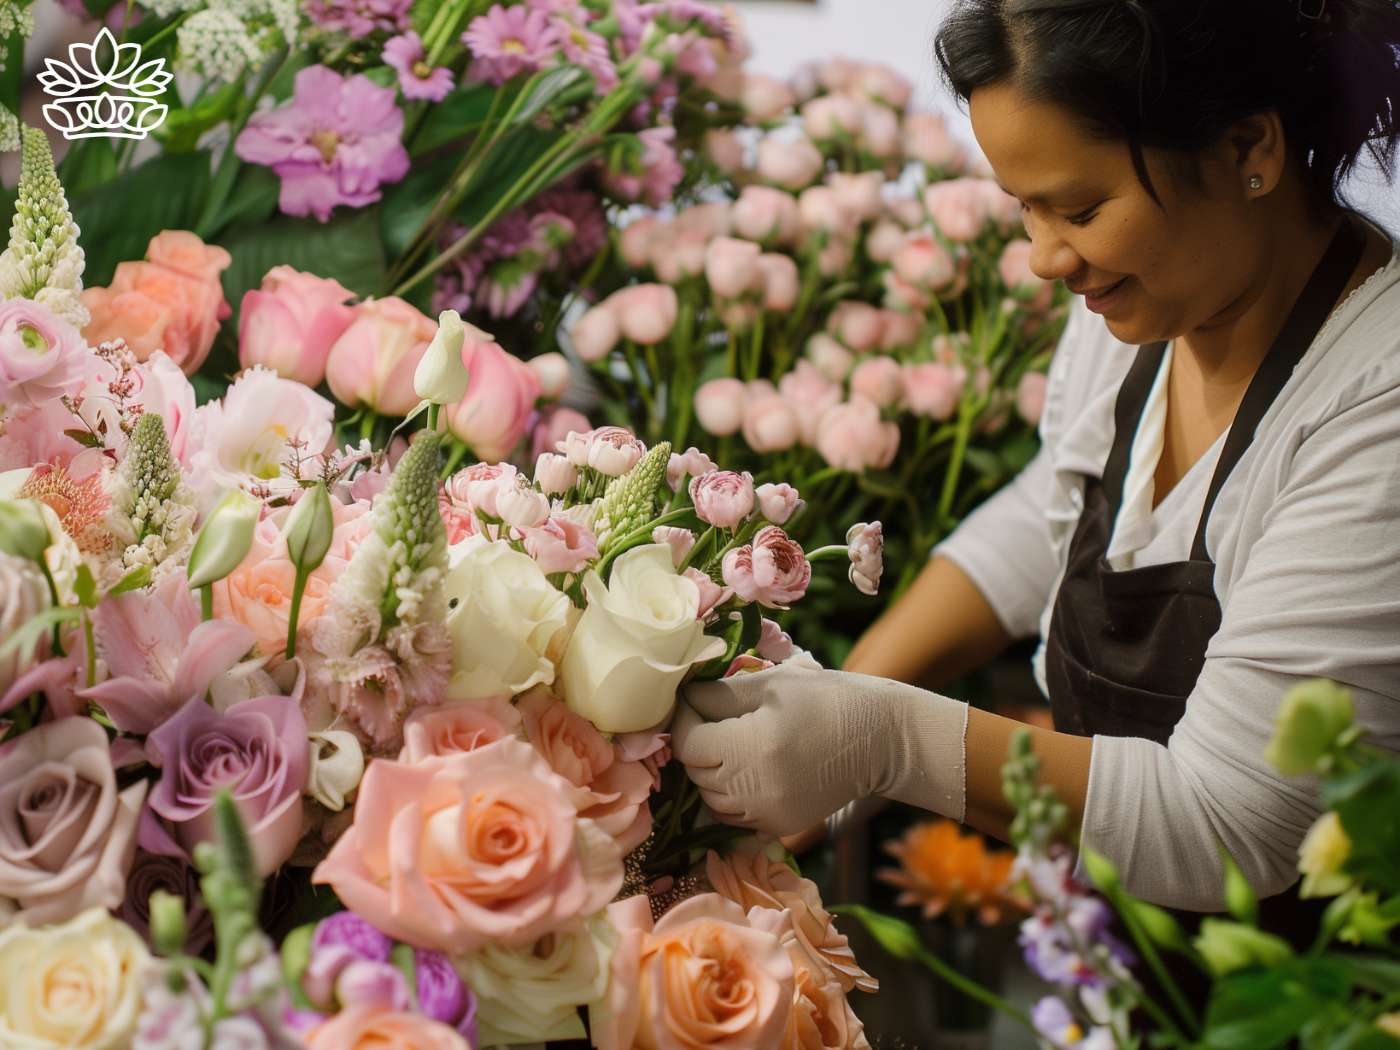 Dedicated florist carefully arranging a selection of soft pink tulips, creamy roses, and delicate lilies, creating an aura of elegance and natural beauty in a blooming flower shop—Fabulous Flowers and Gifts.